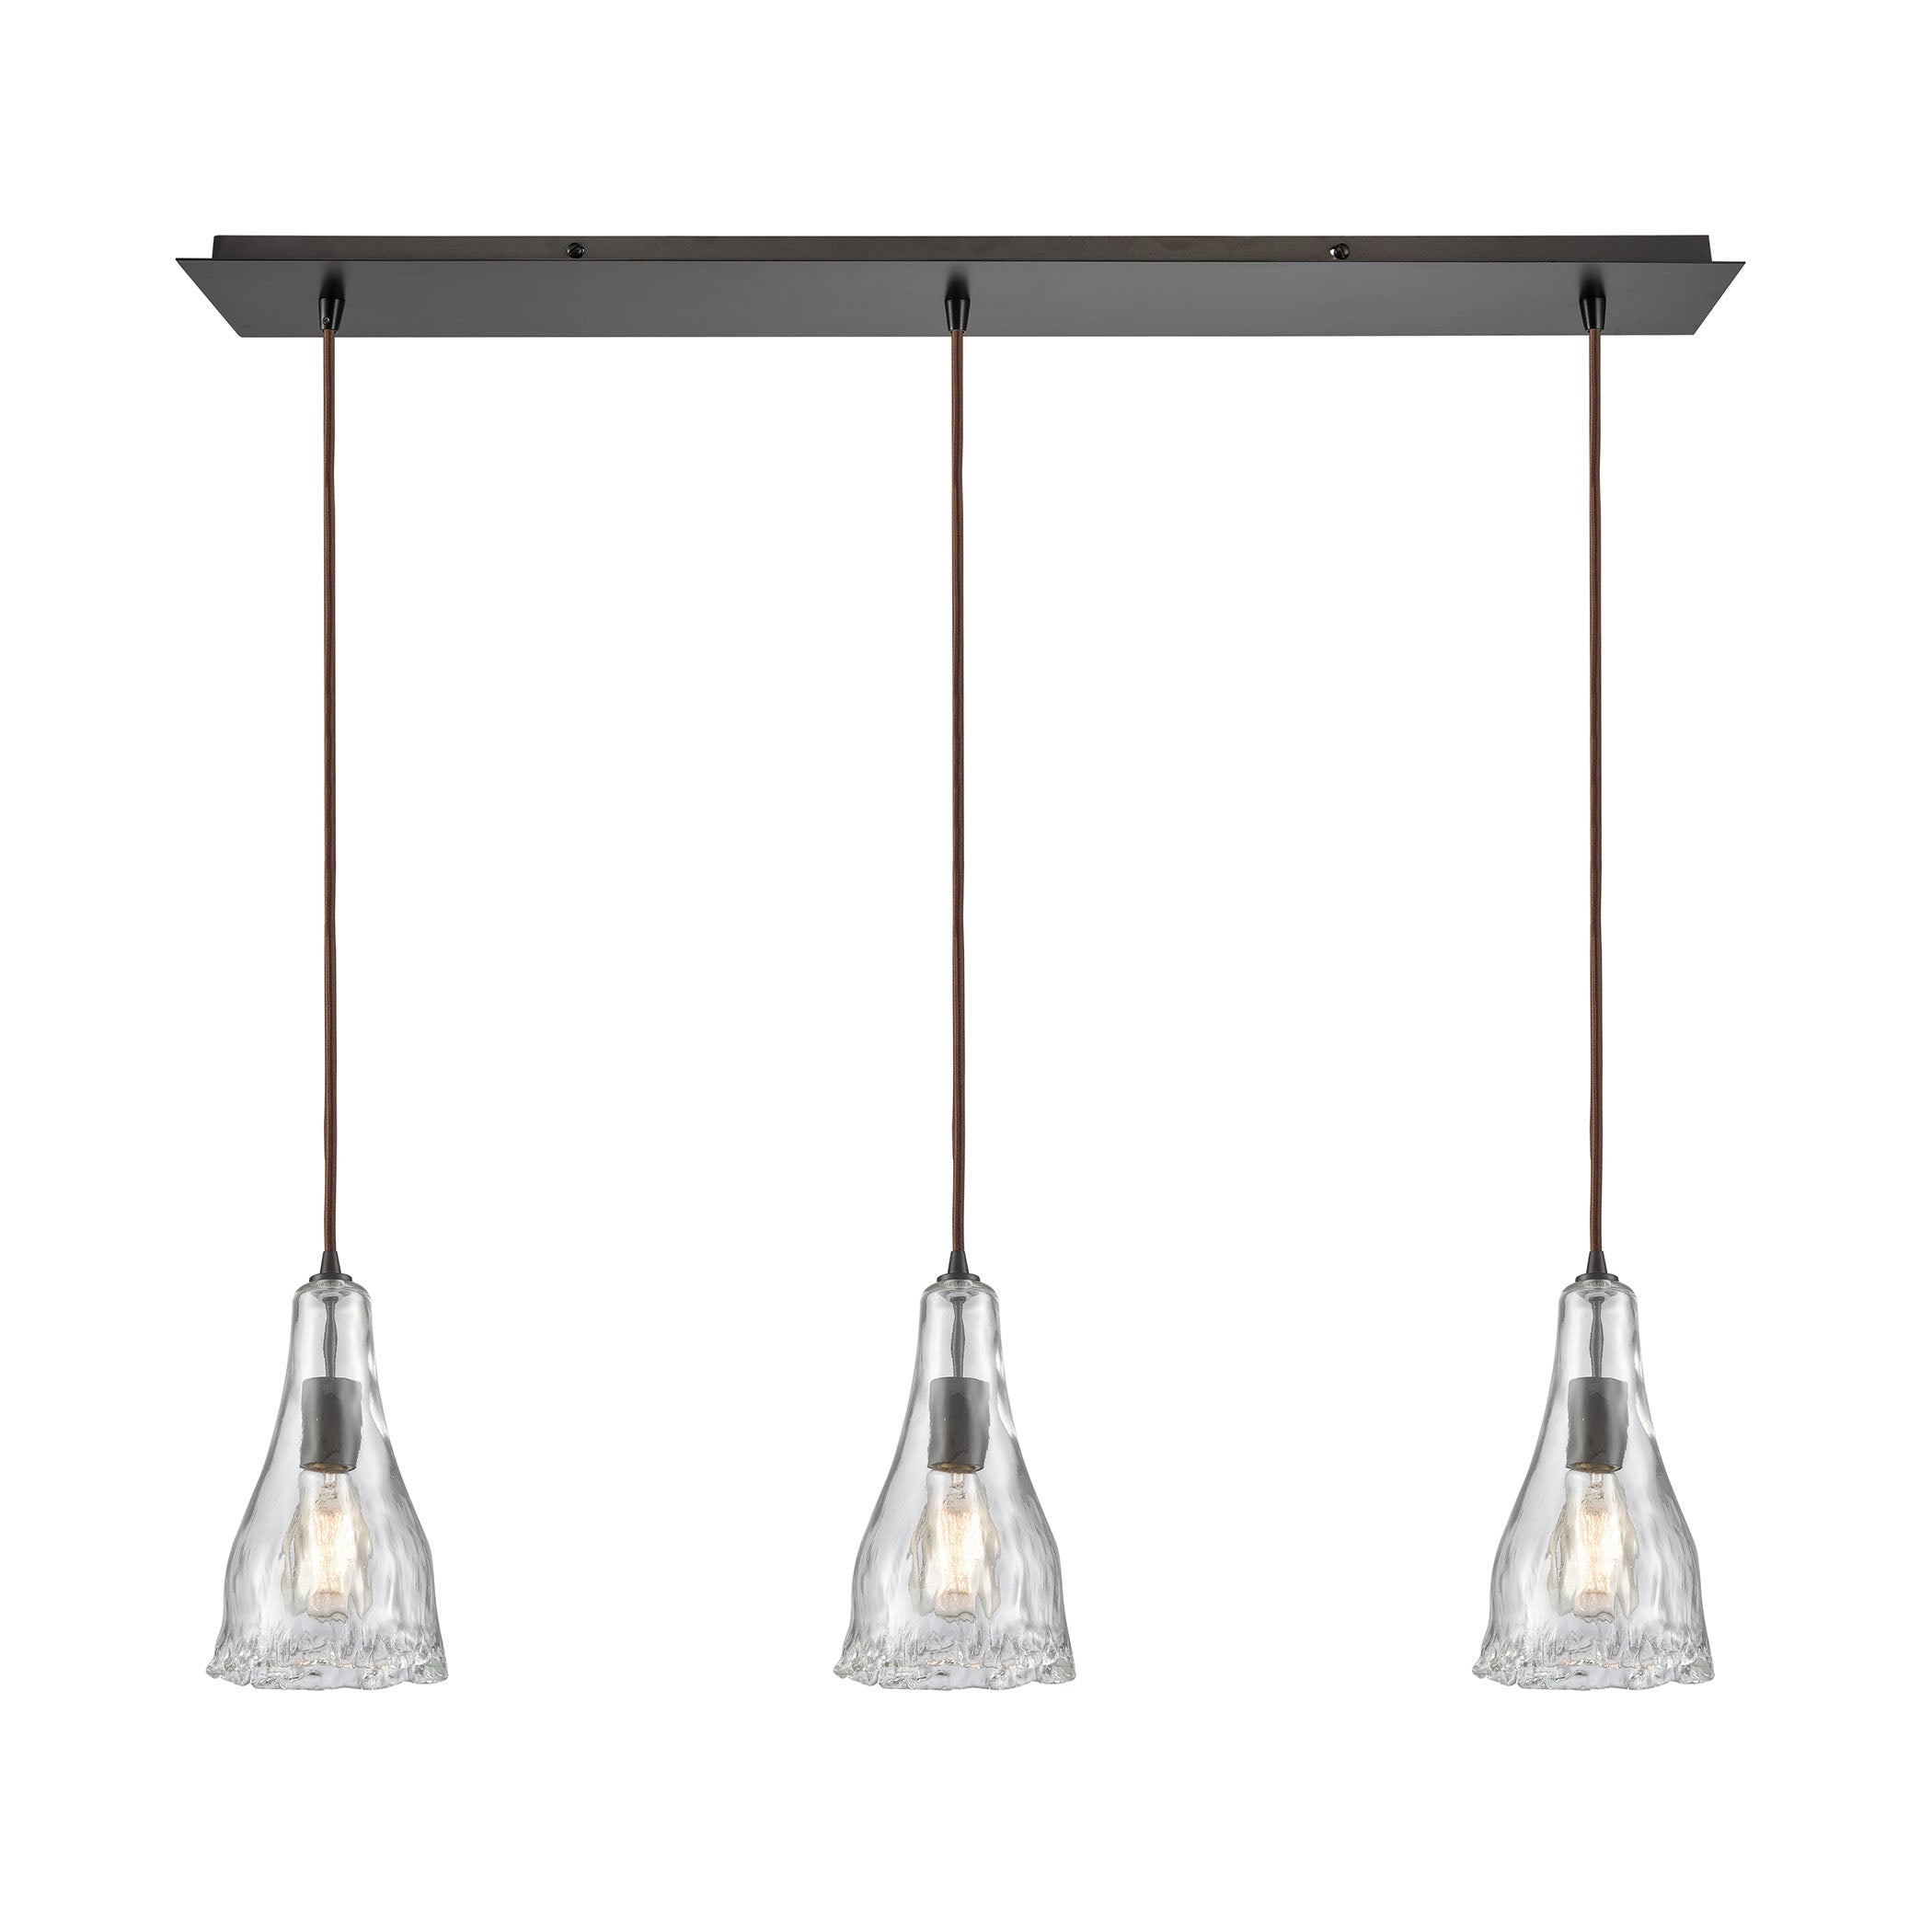 ELK Lighting 10446/3LP Hand Formed Glass 3-Light Linear Mini Pendant Fixture in Oiled Bronze with Clear Hand-formed Glass